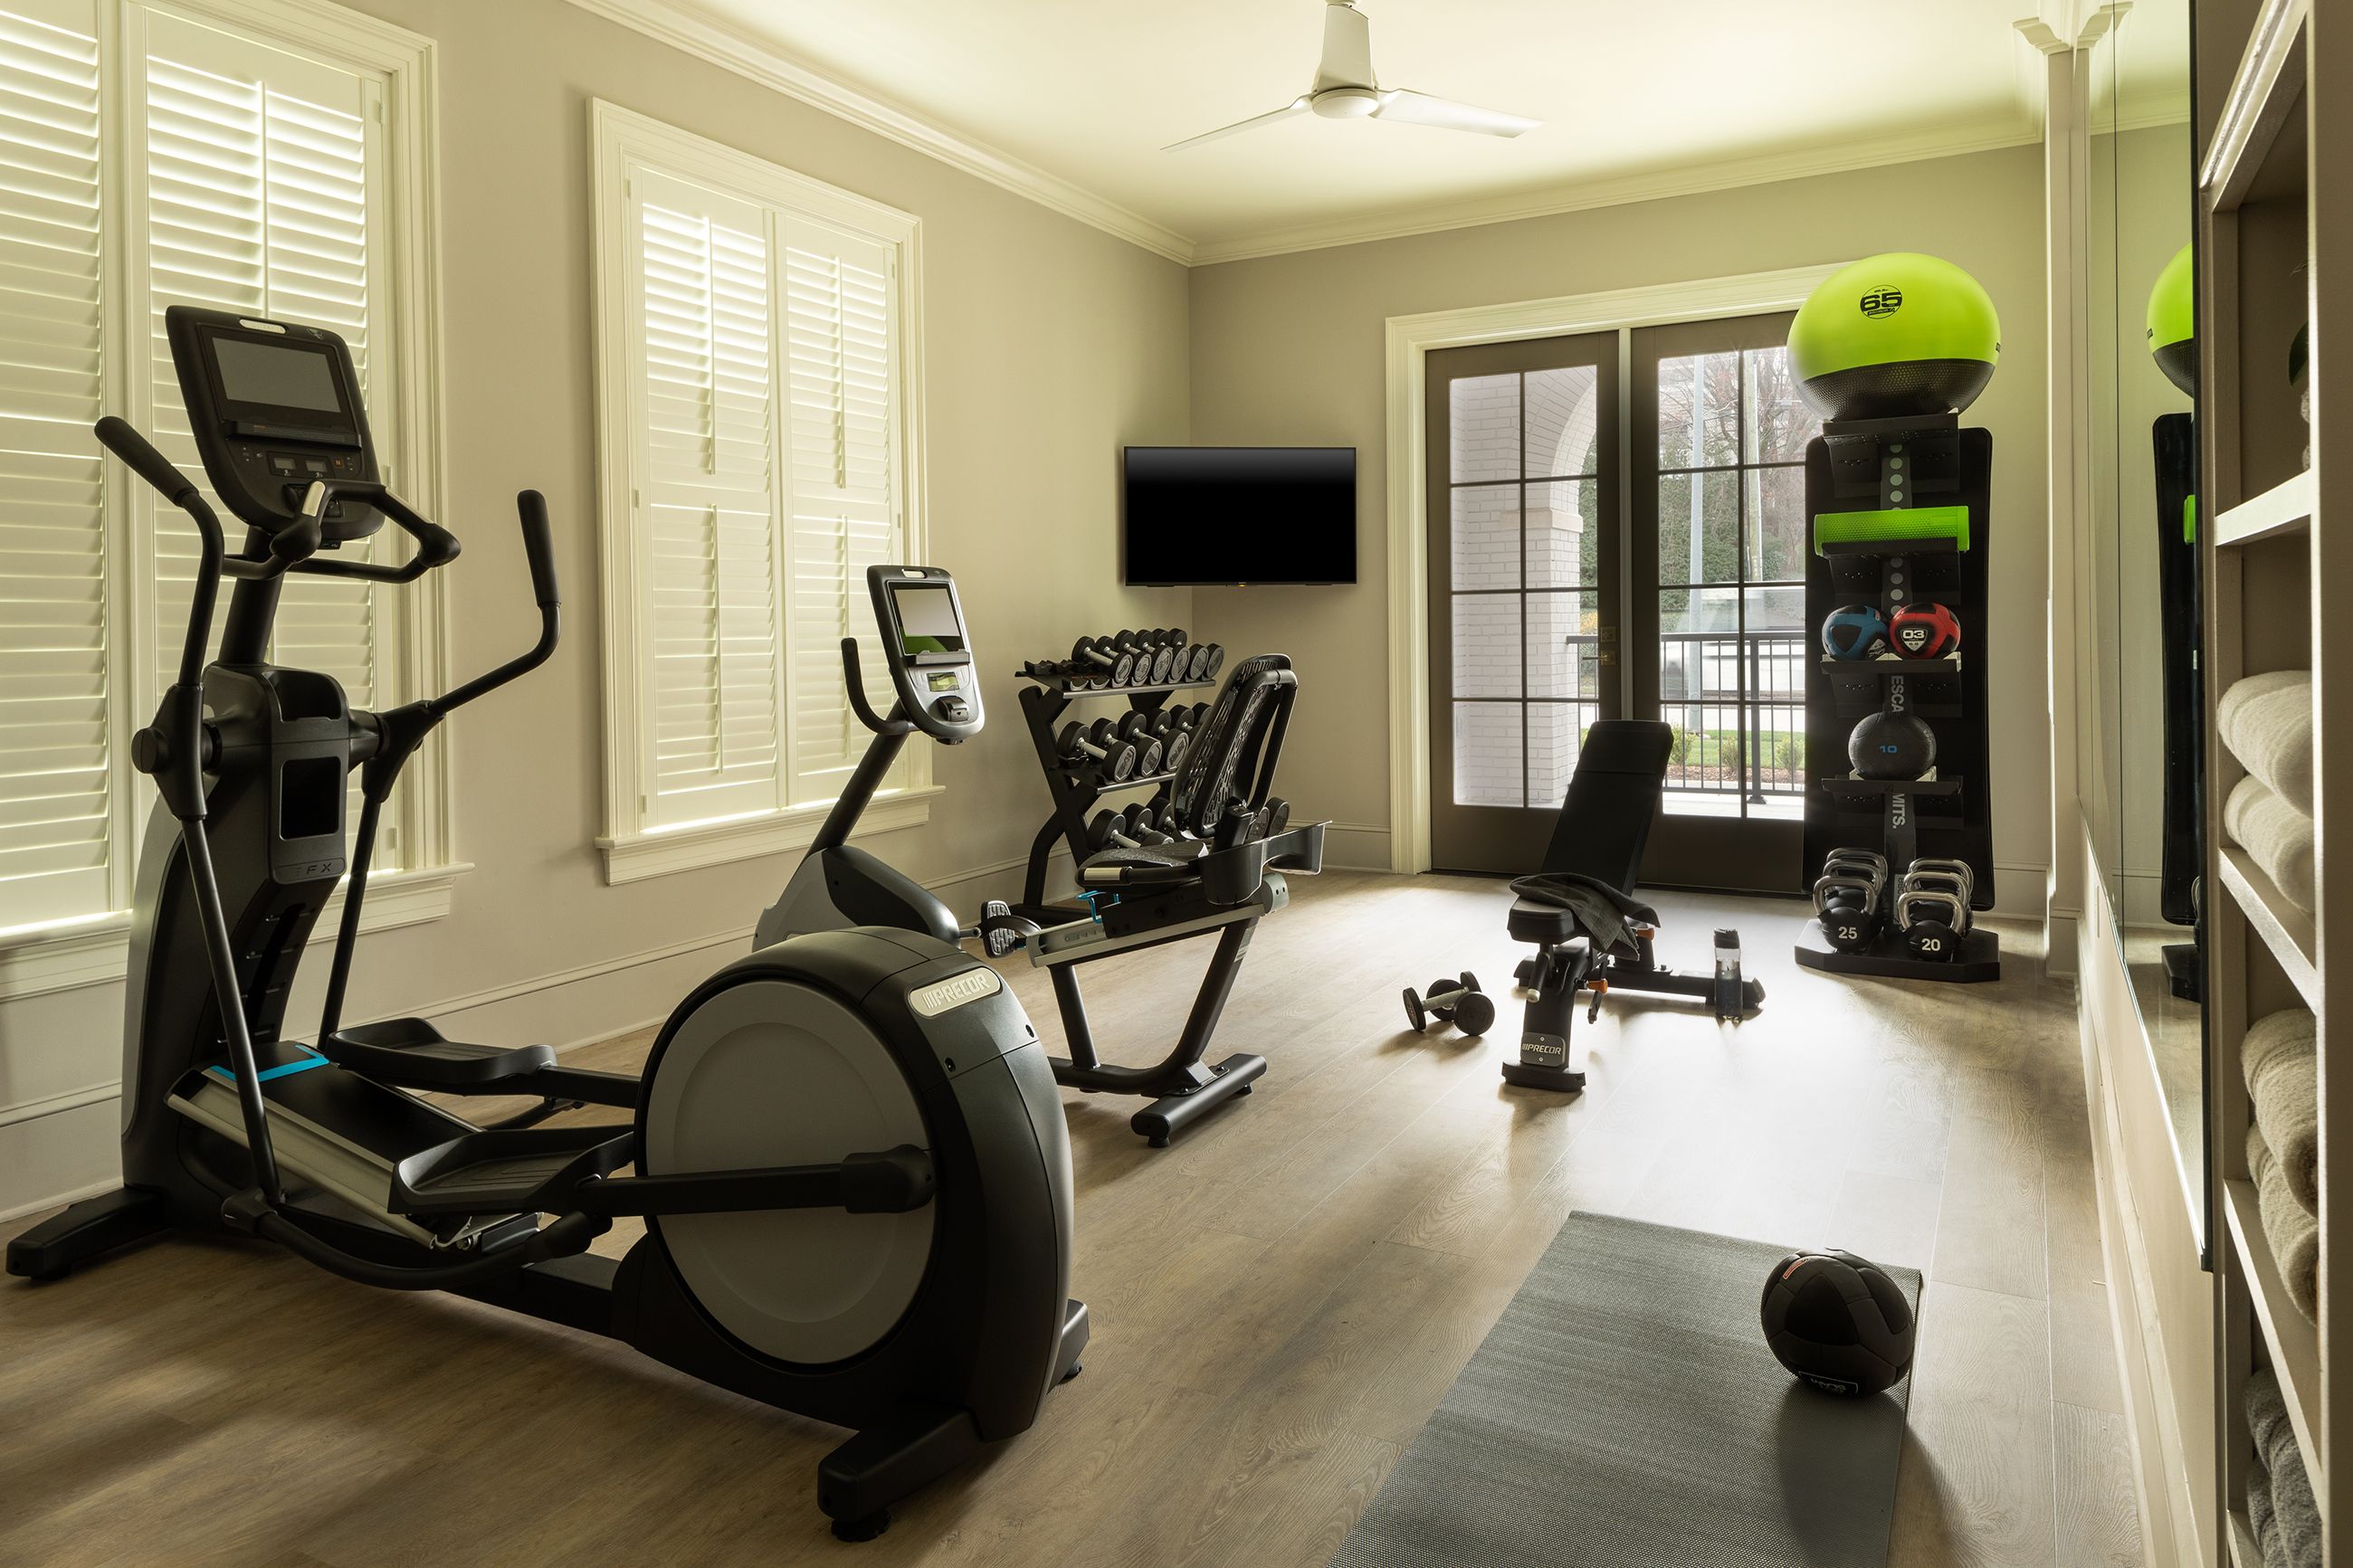 32 Home Gym Ideas, How to Make a Home Gym in Any Space